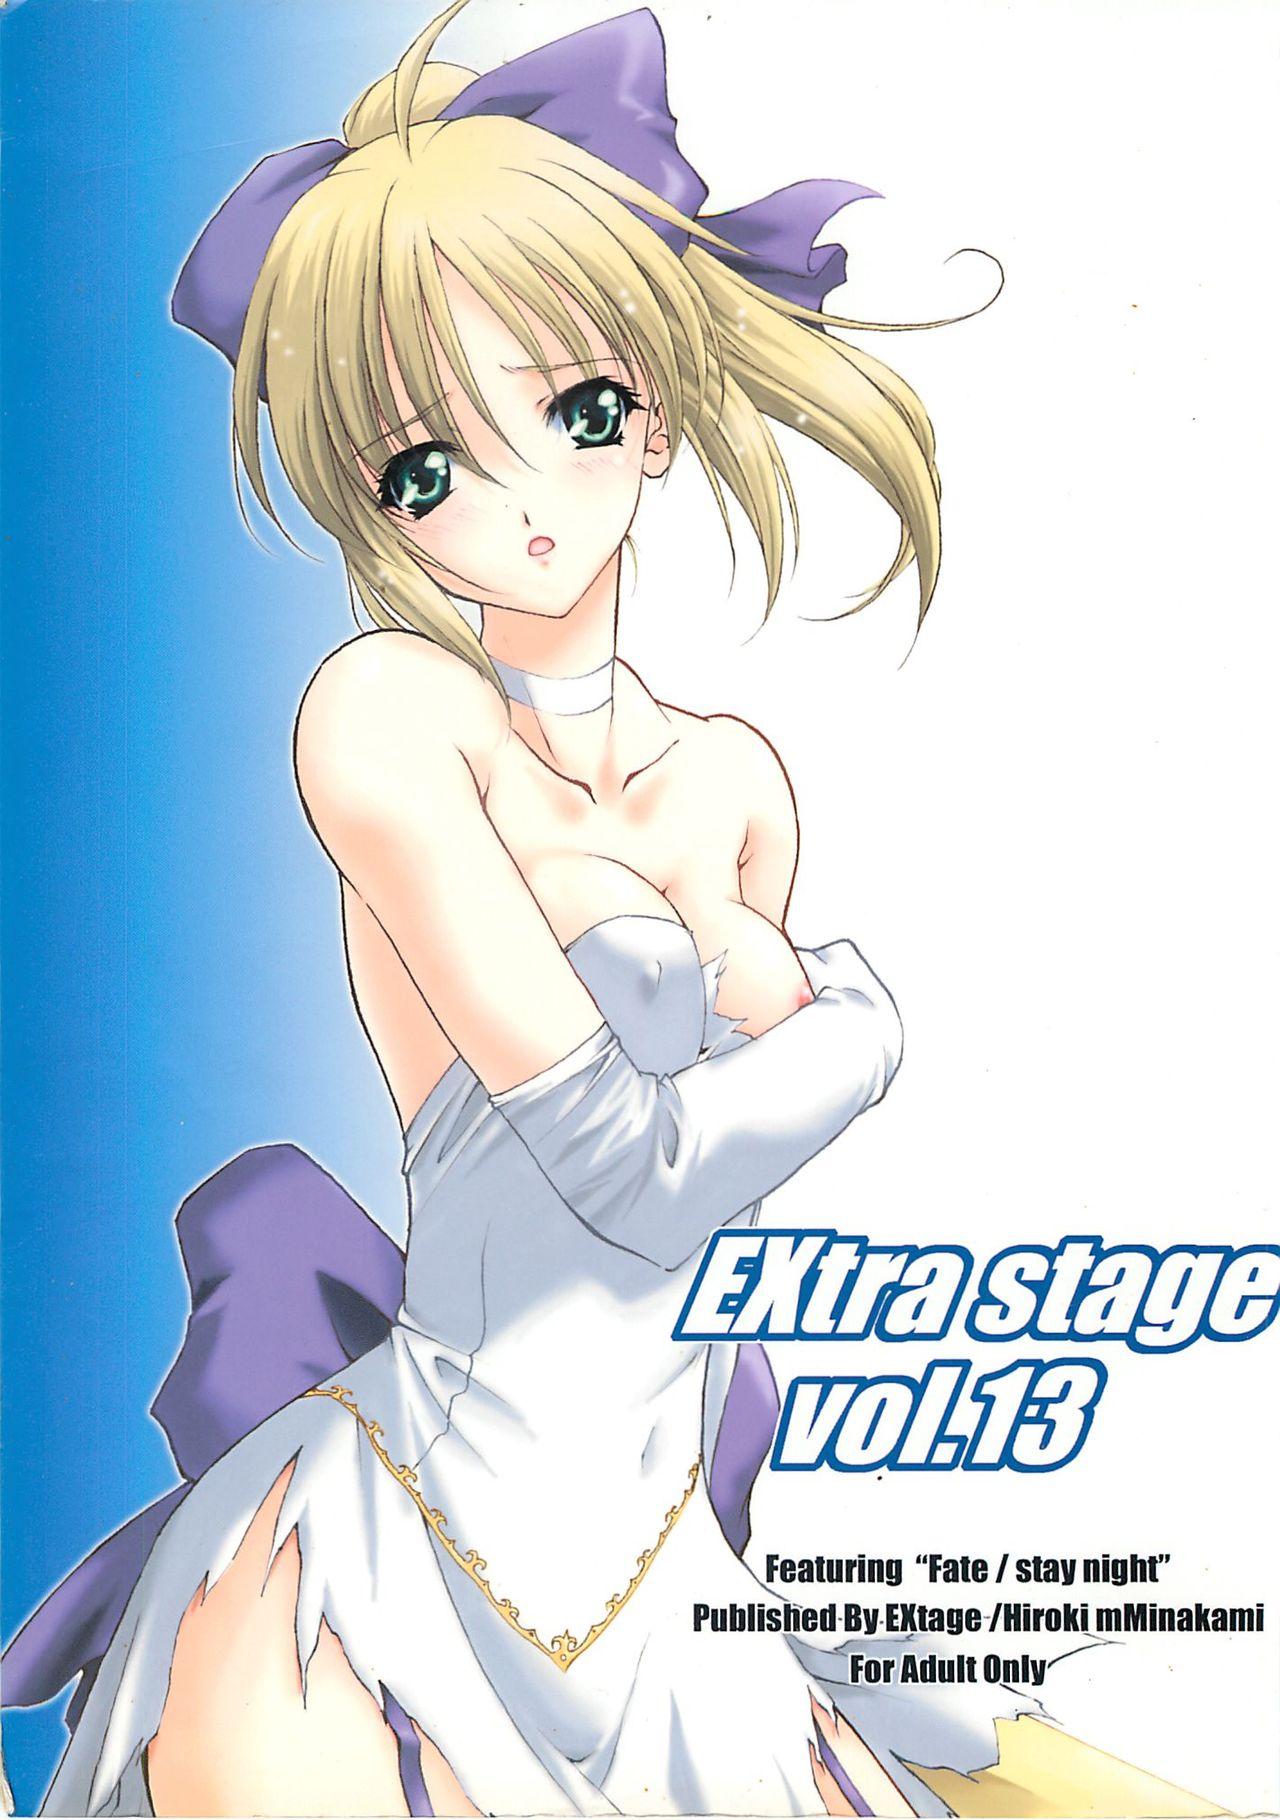 Bottom EXtra stage vol. 13 - Fate stay night Full - Picture 1